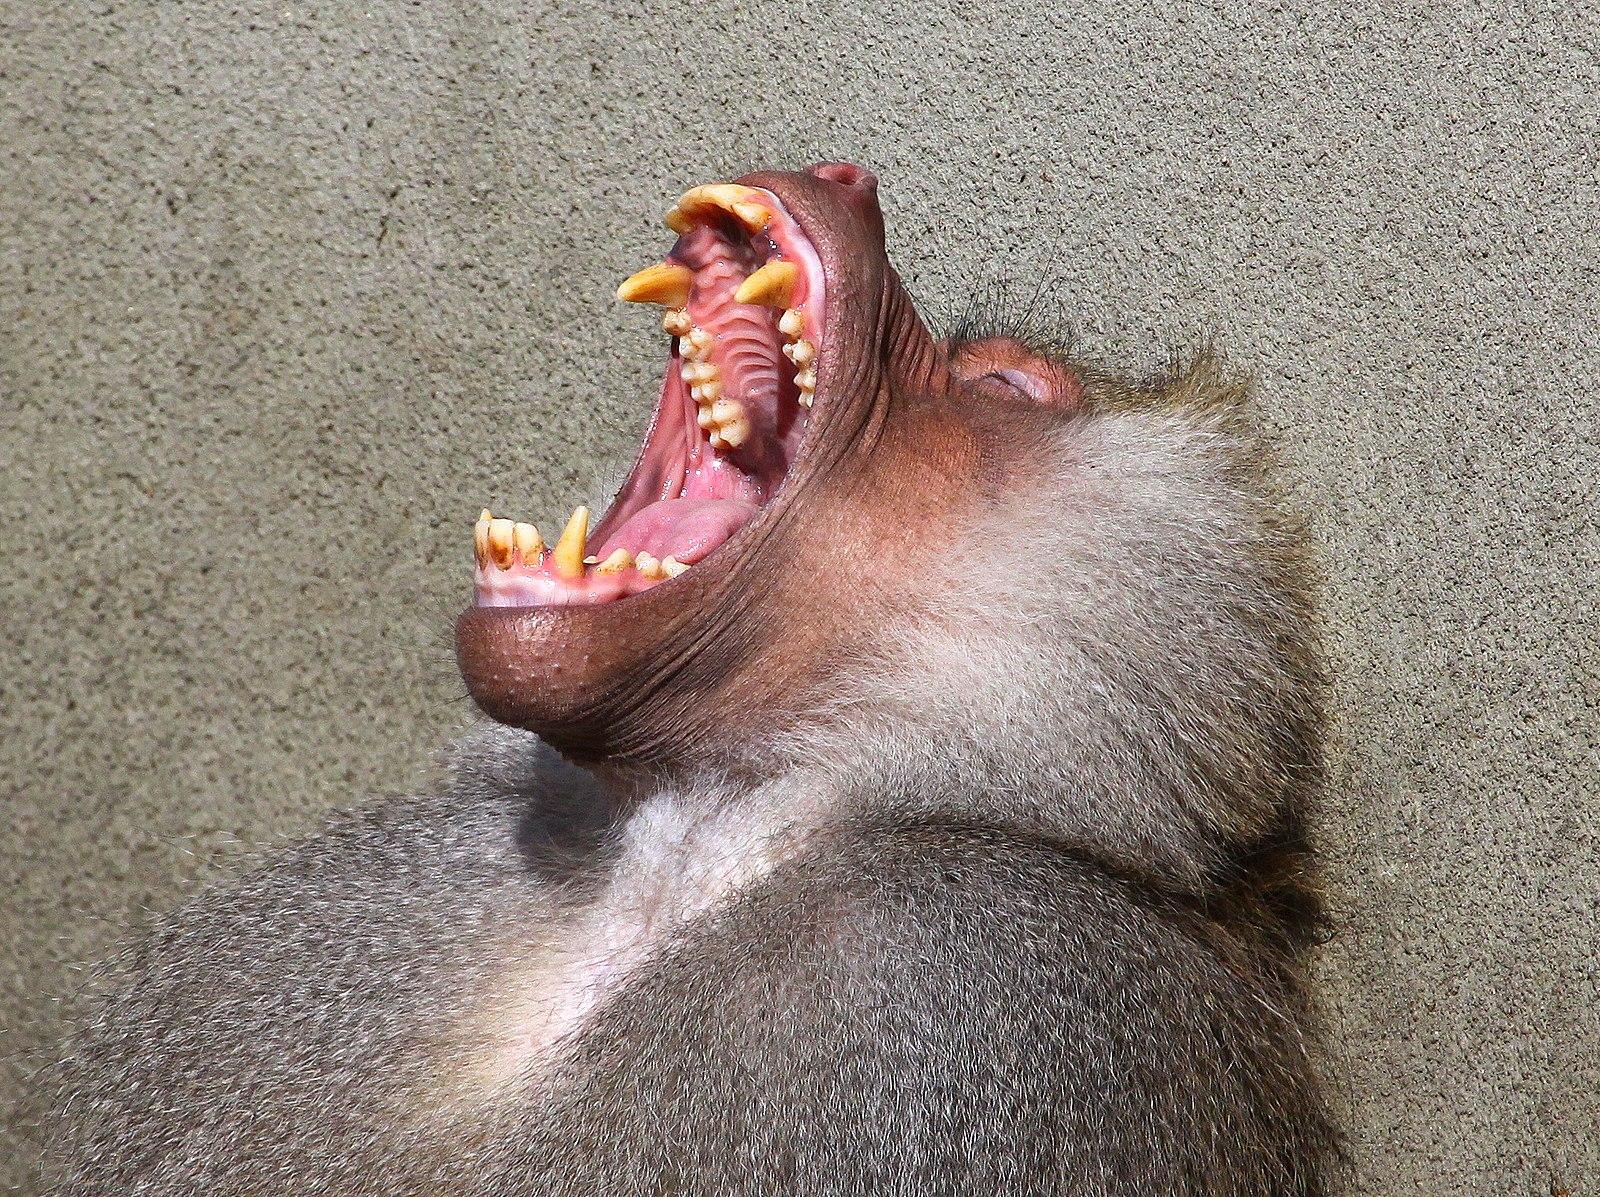 Image of an open-mouthed Hamadryas baboon clearly demonstrates the diastema between his upper canine and front teeth.